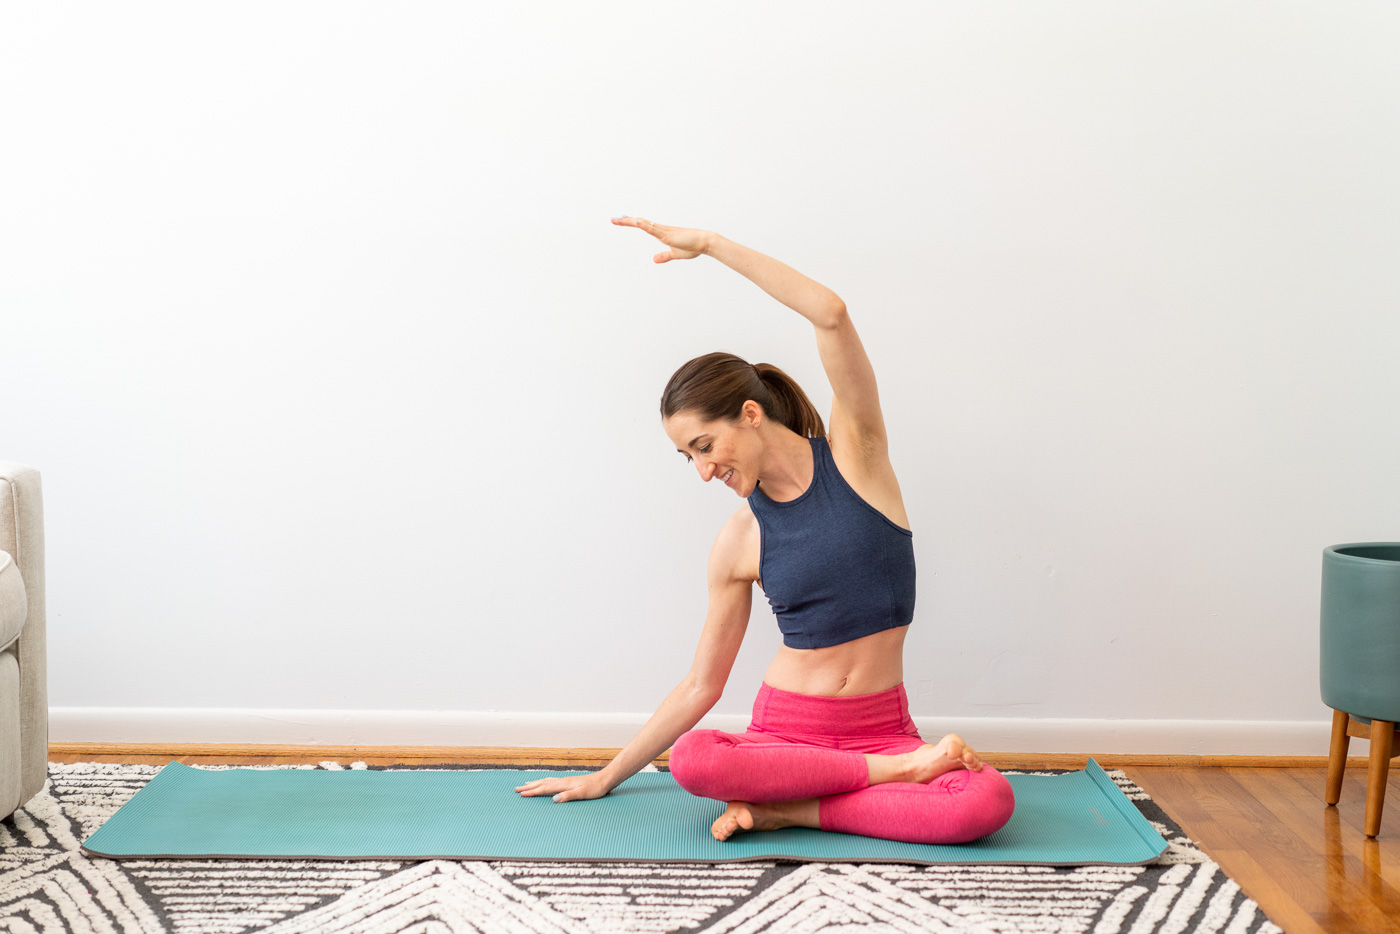 Woman sitting cross-legged on a blue yoga mat and doing a side stretch